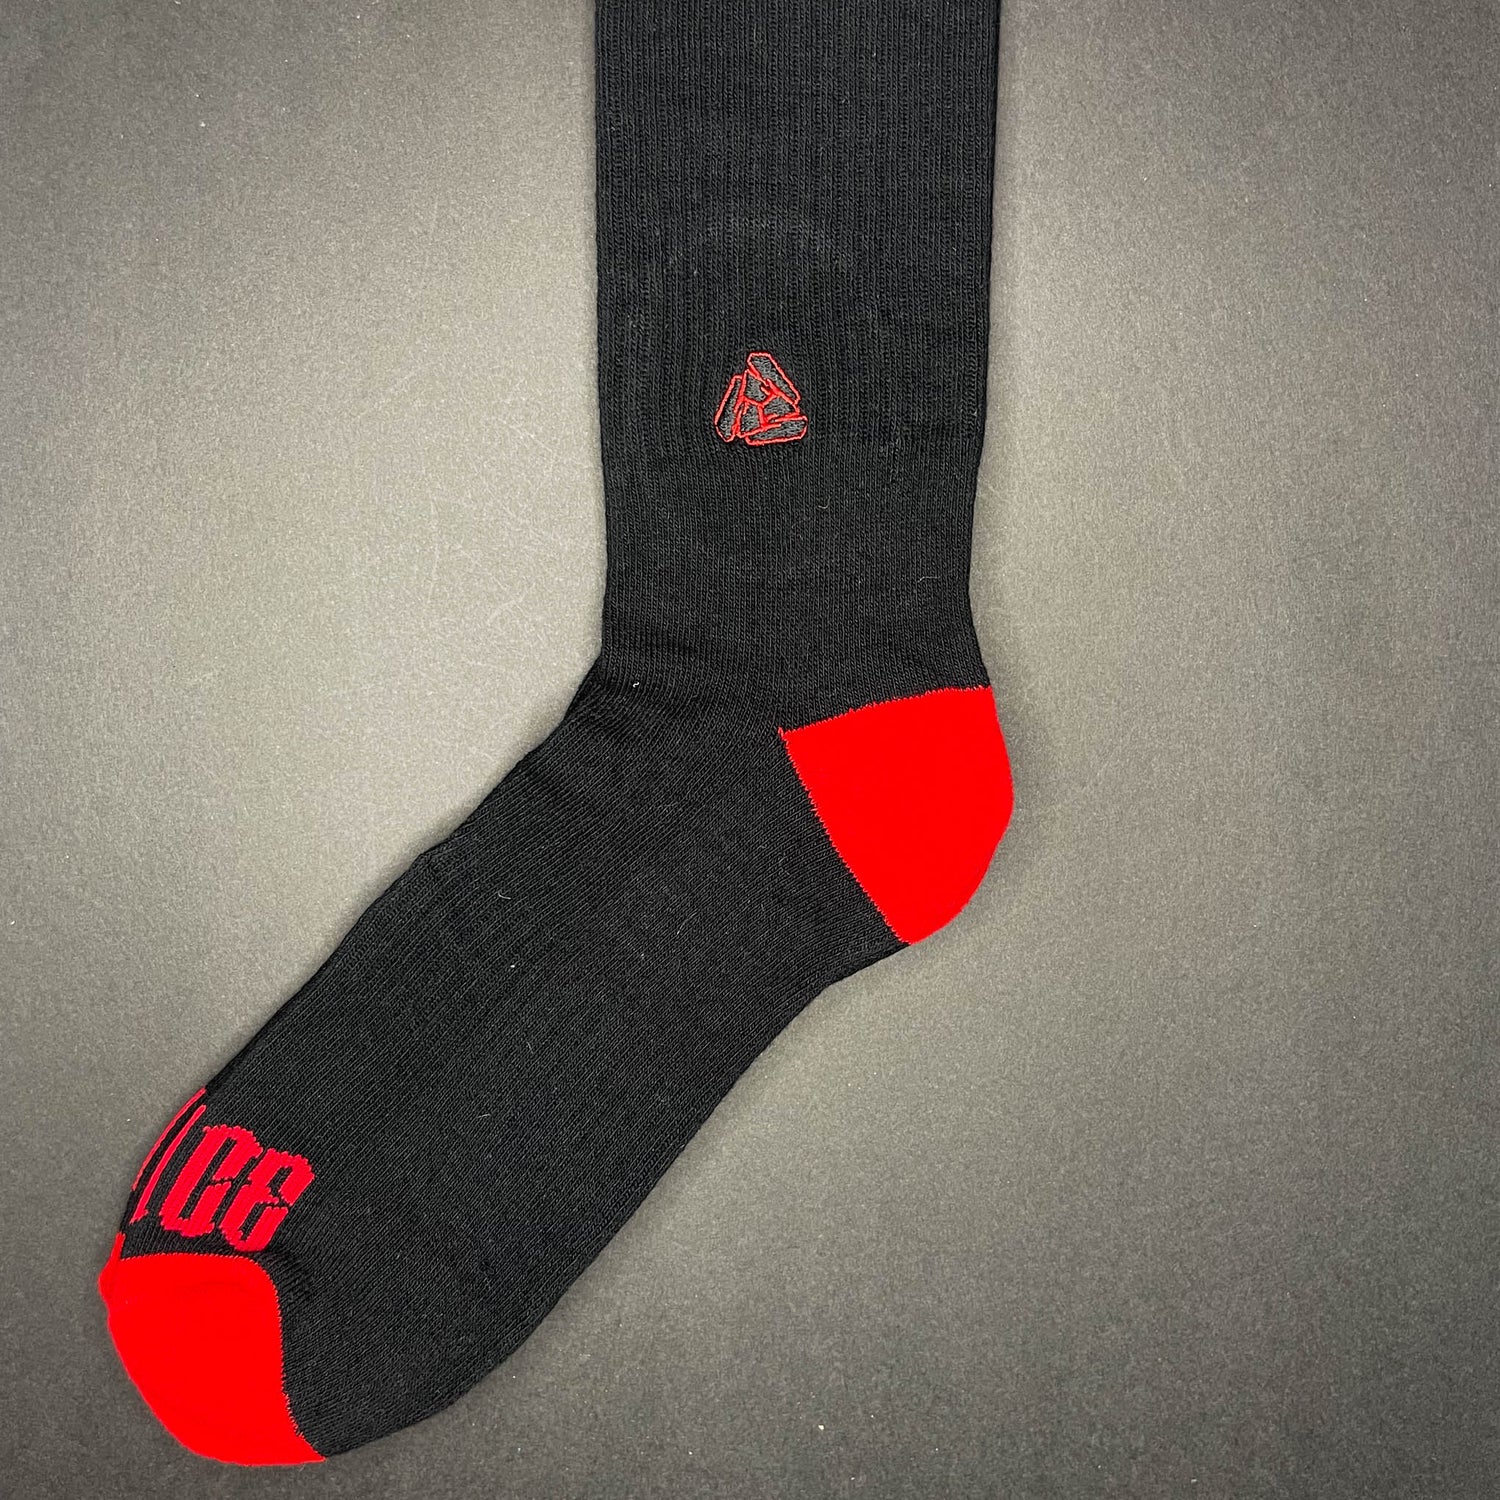 Side view of Menace Clothing Hood Rat red and black knee high socks with Menace on toes and Tri M logo on side.